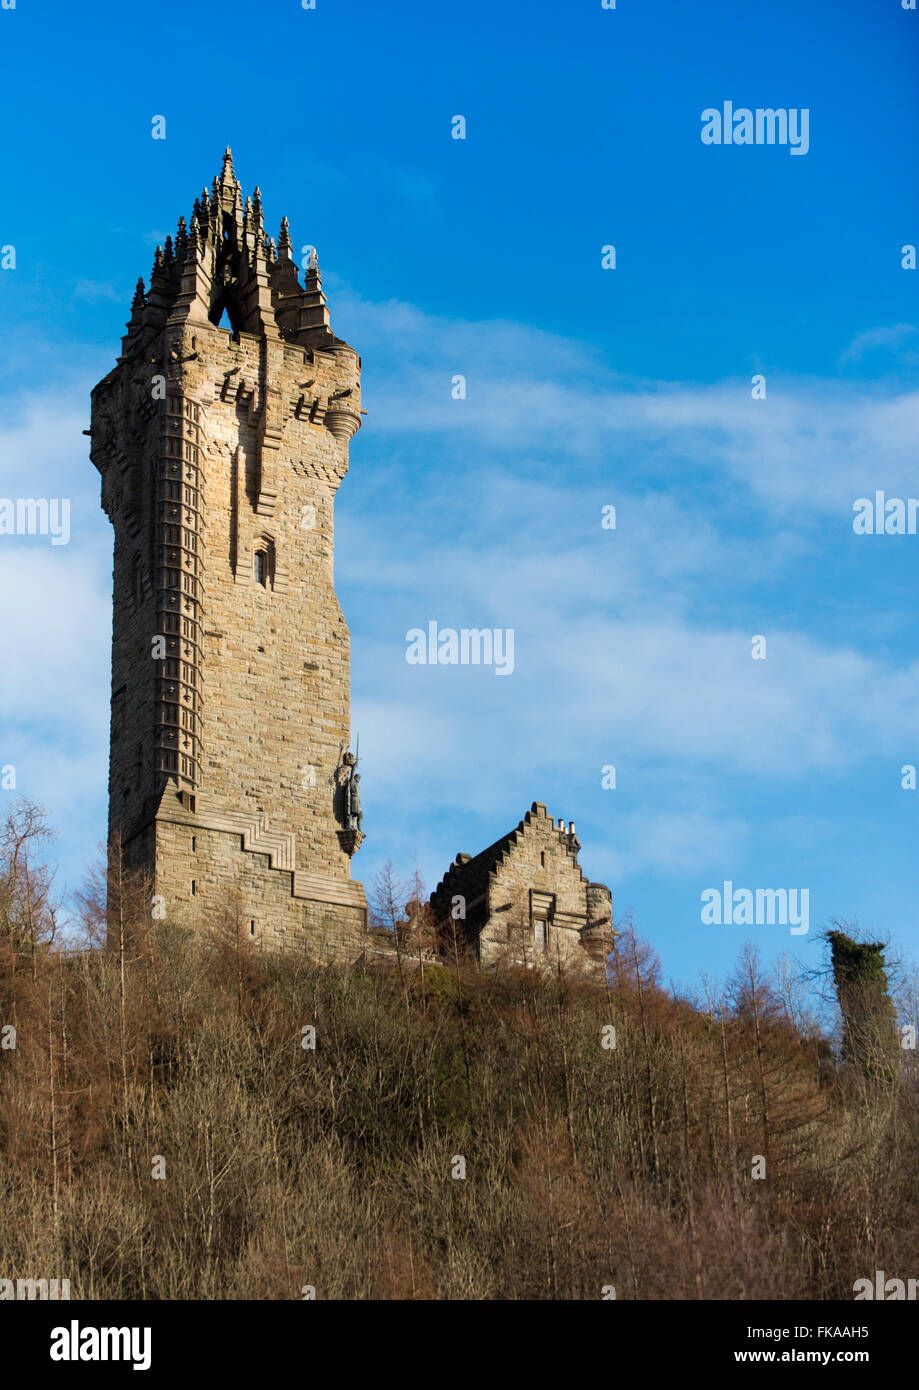 Das National Wallace Monument, bekannt als das Wallace Monument in Stirling Stockfoto